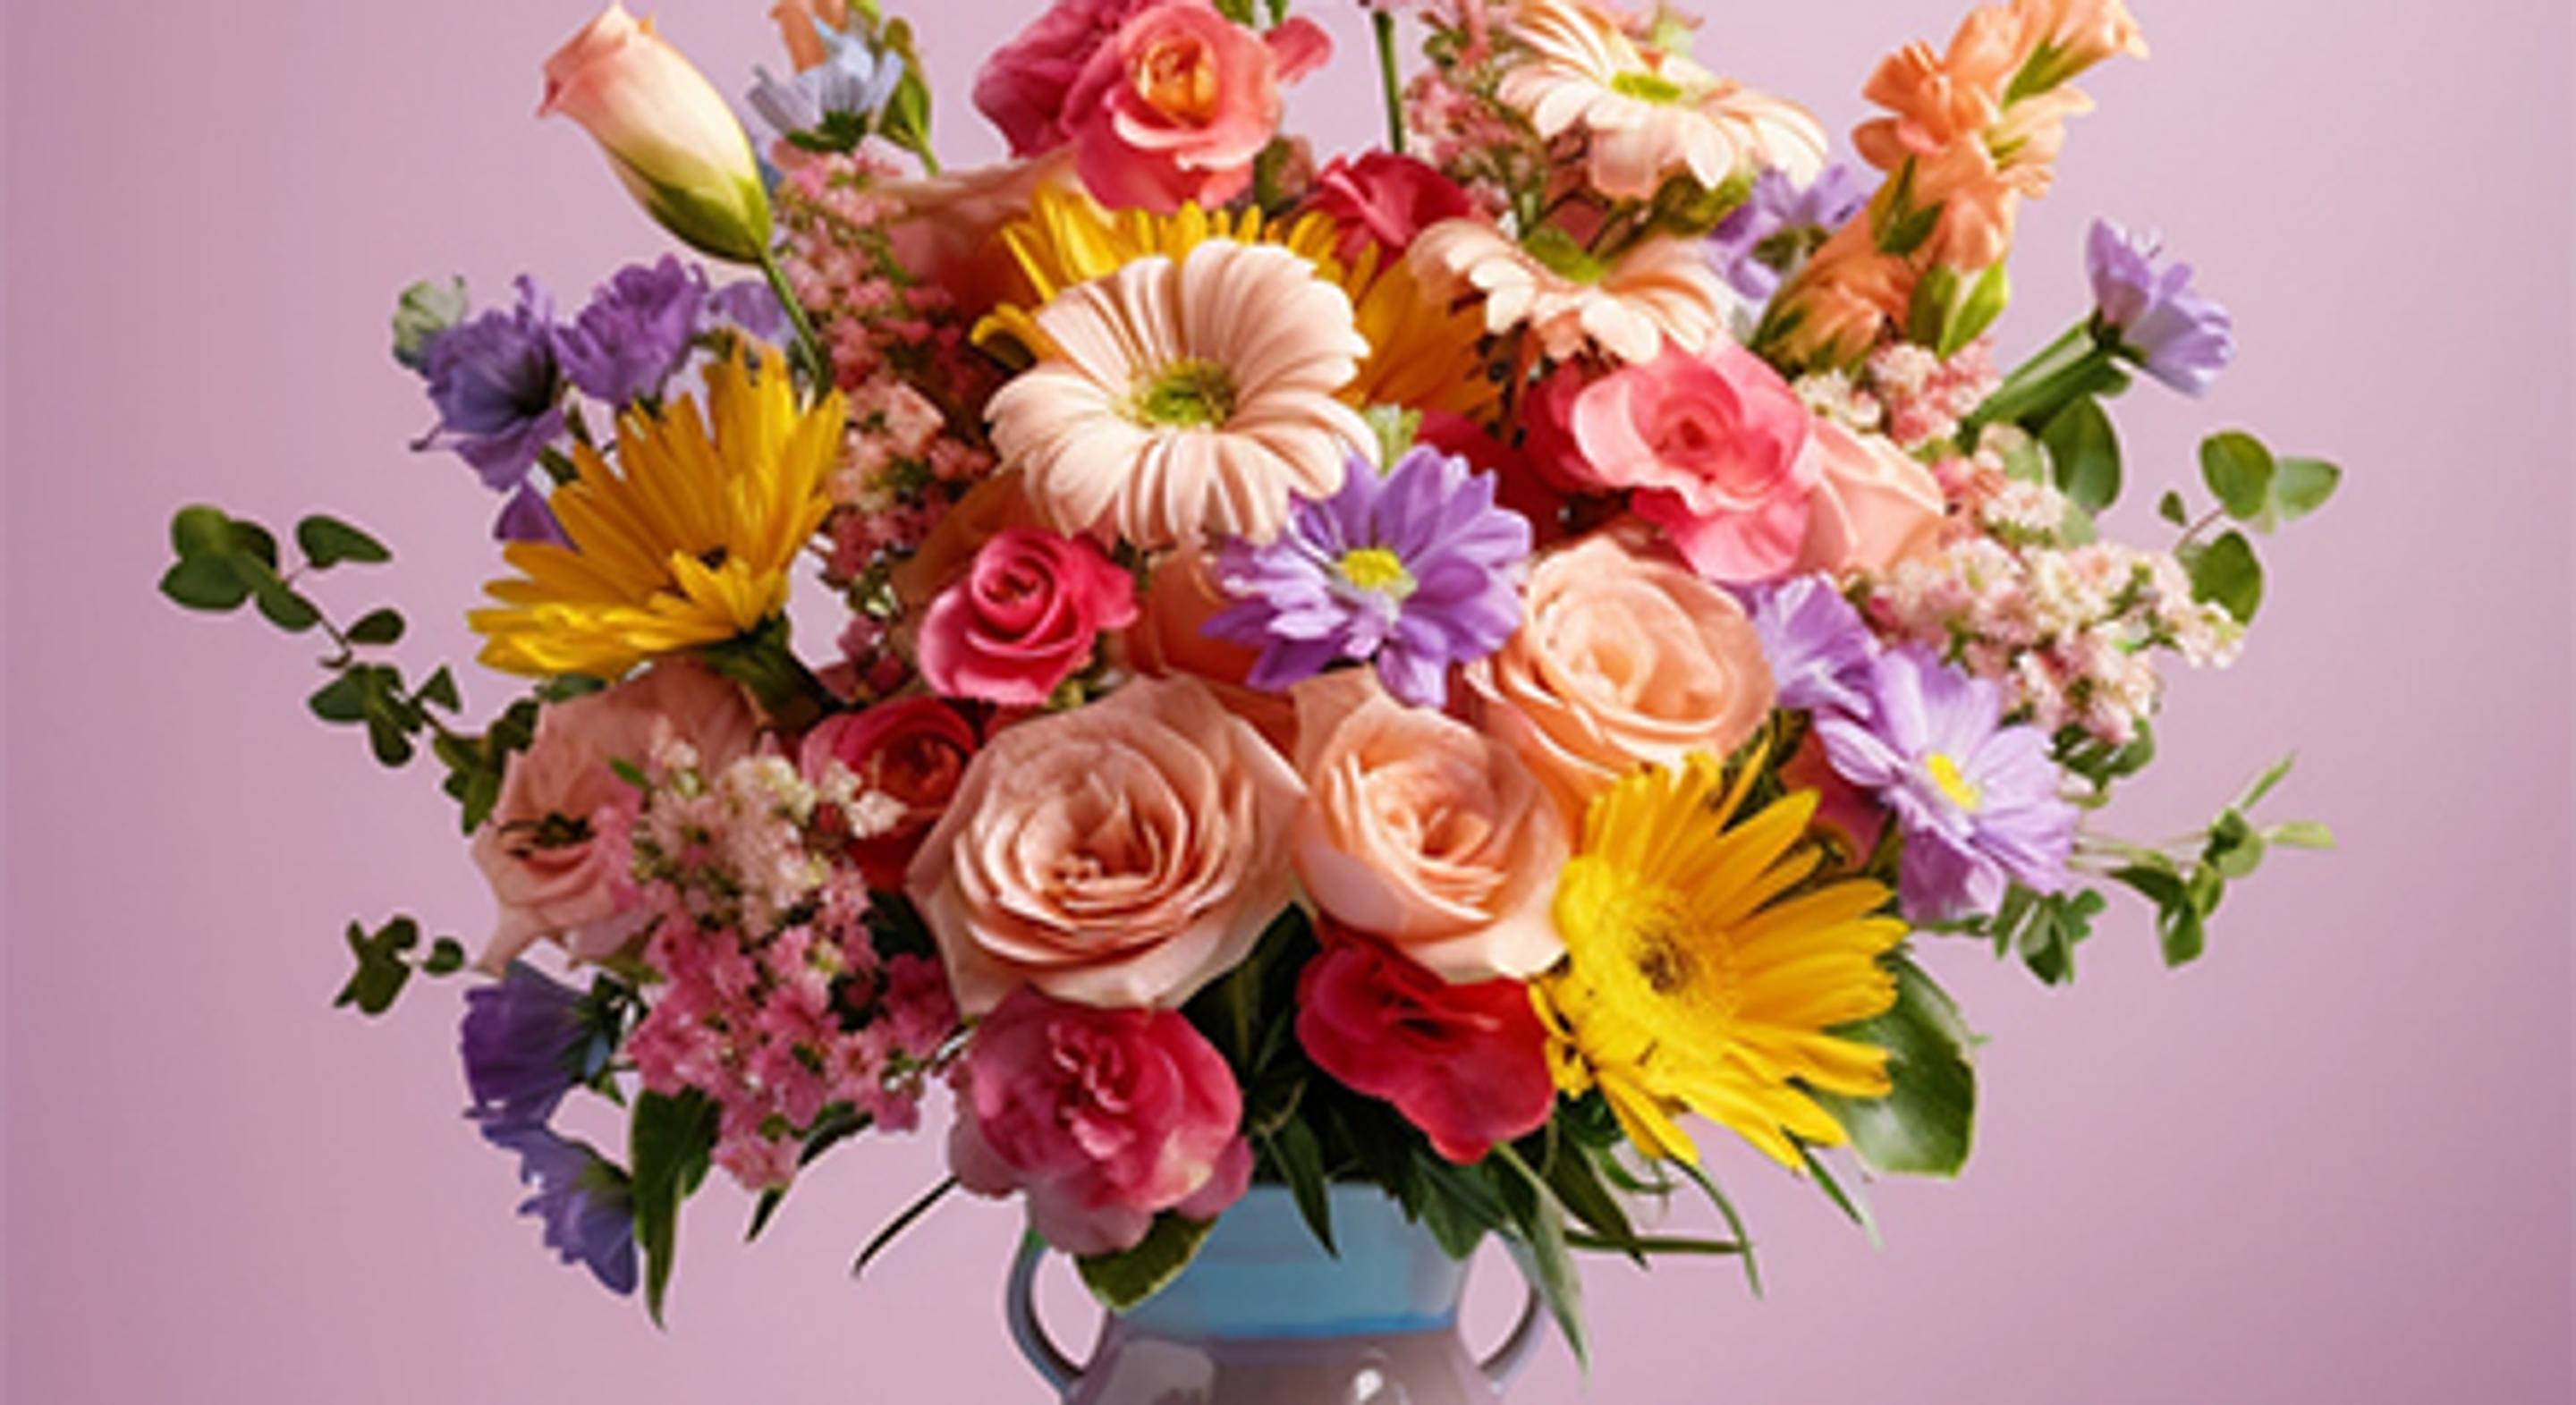 Bright and colorful flower bouquet for a birthday